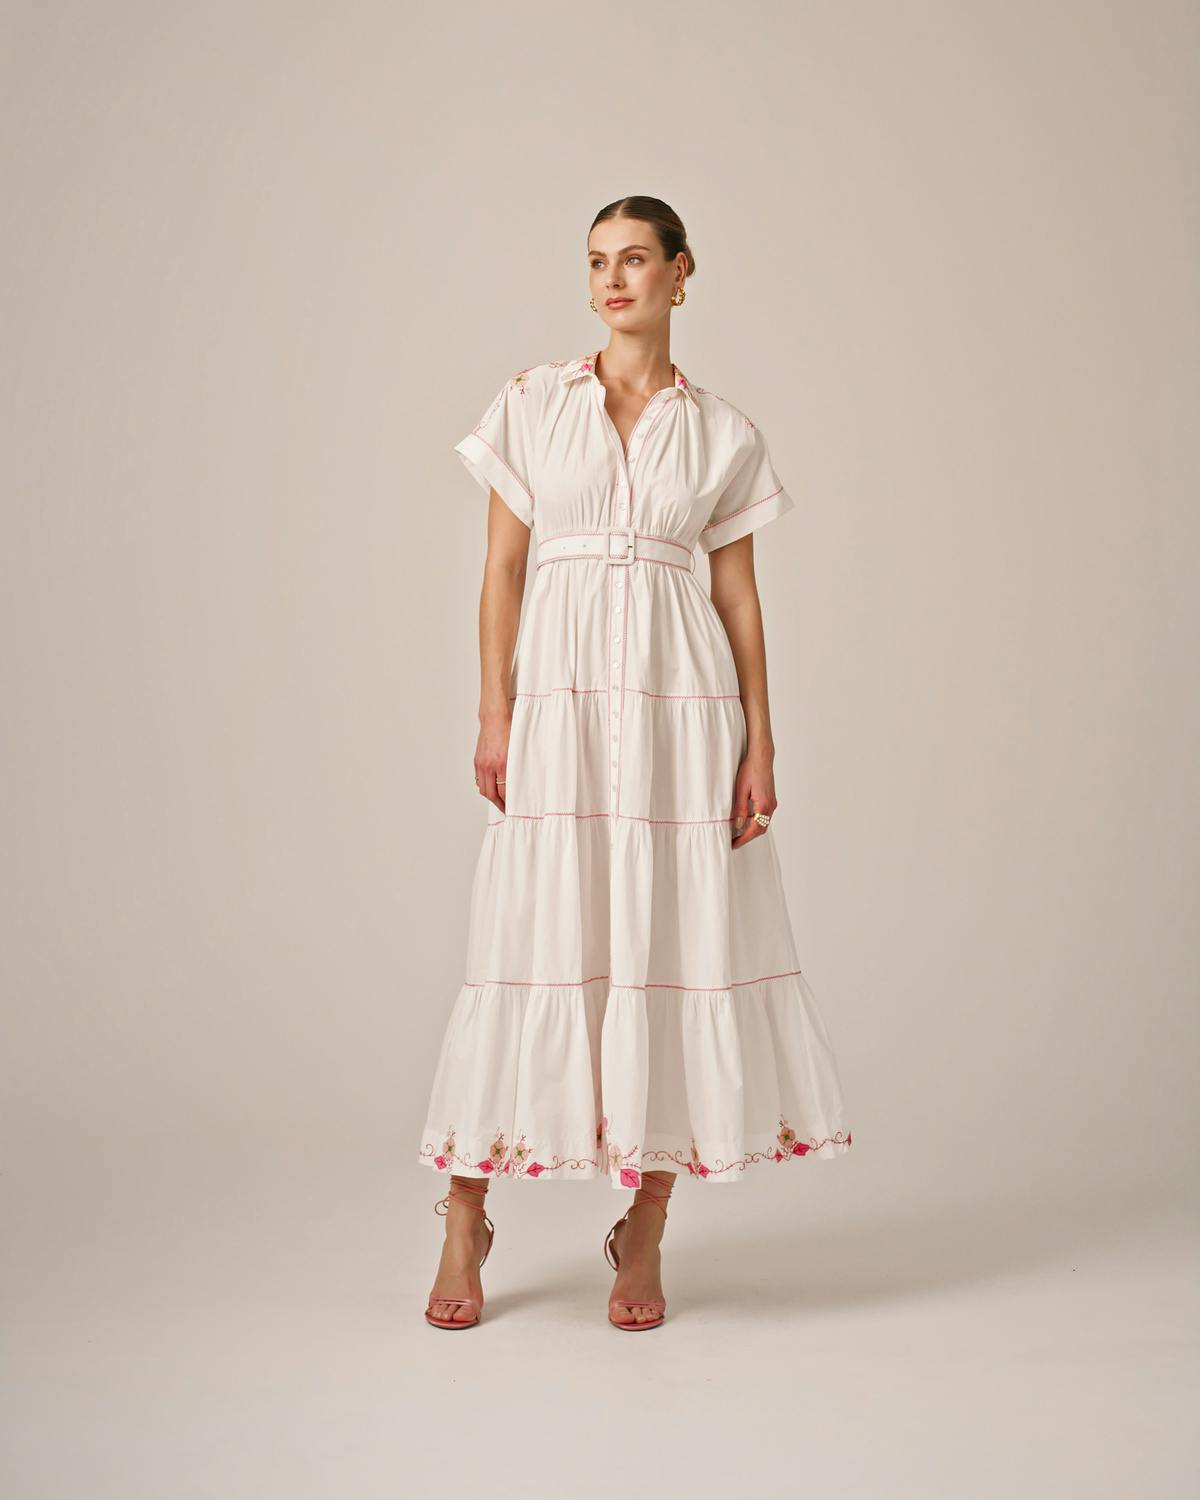 Poplin Embroidered Shirt Dress, White With Embroidery. Image #2